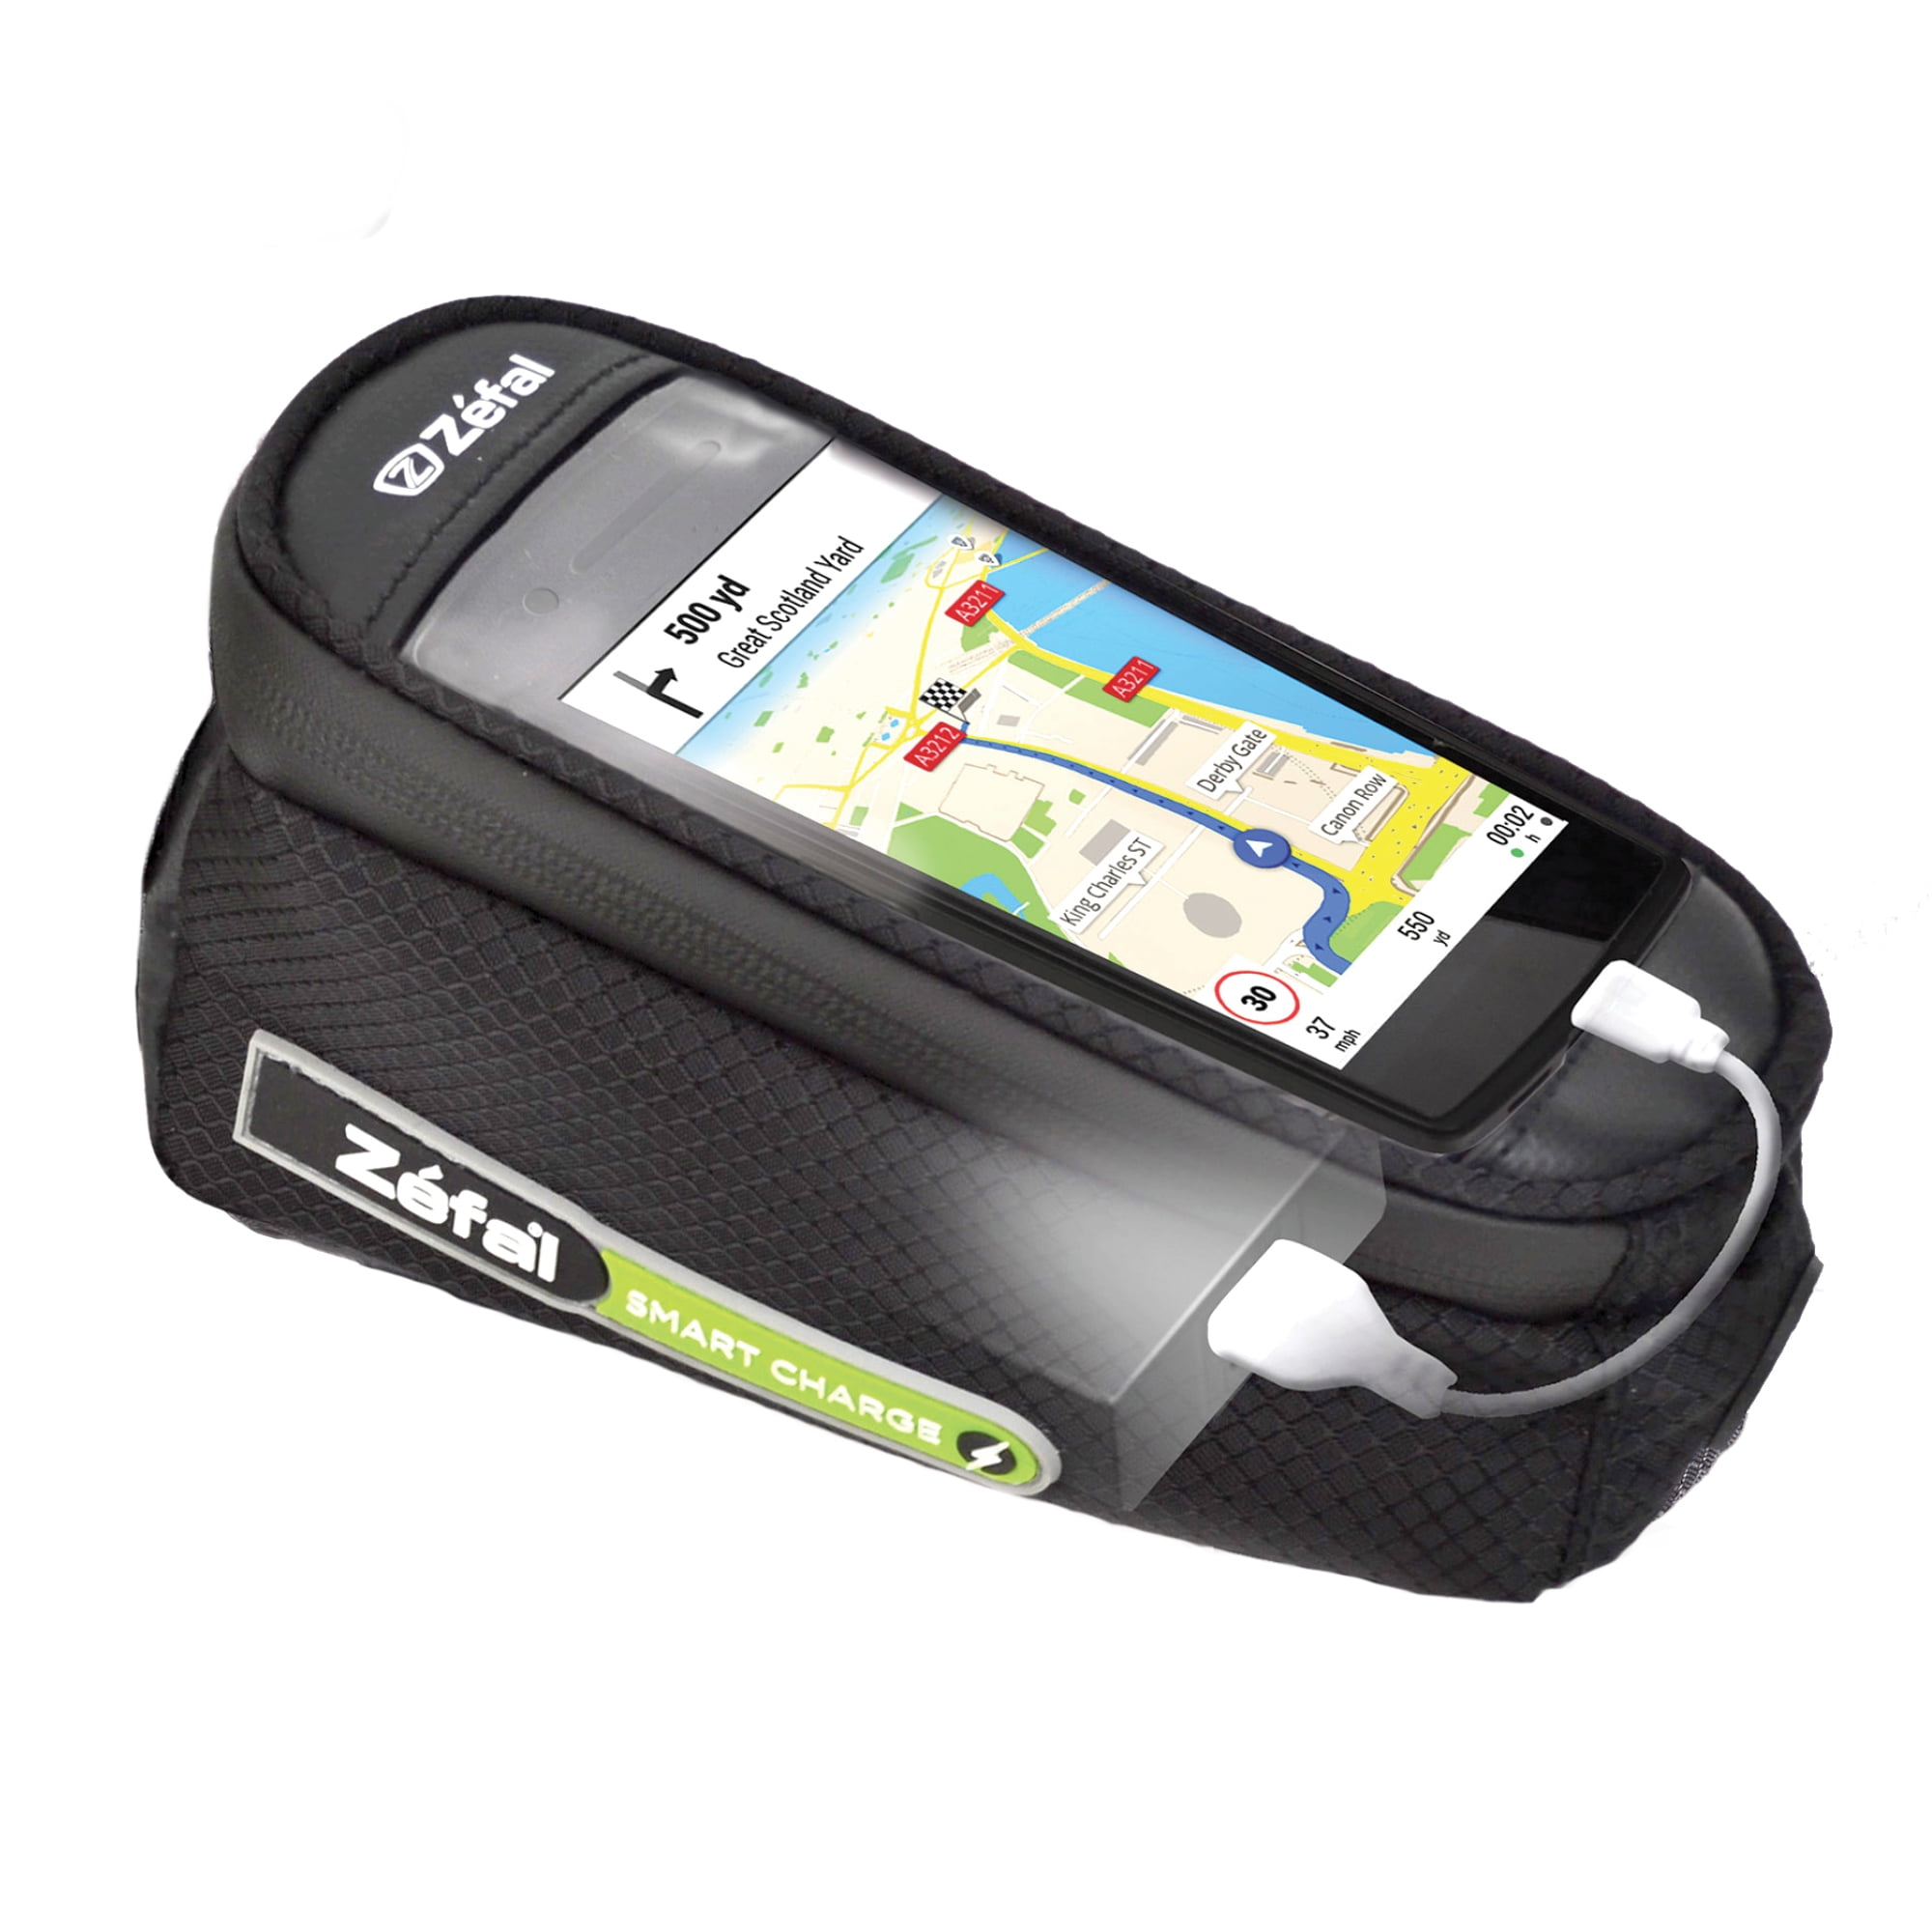 Zefal Smart Phone Charge Bike Bag - Battery Included (Rechargeable - Store, Use, and Charge)